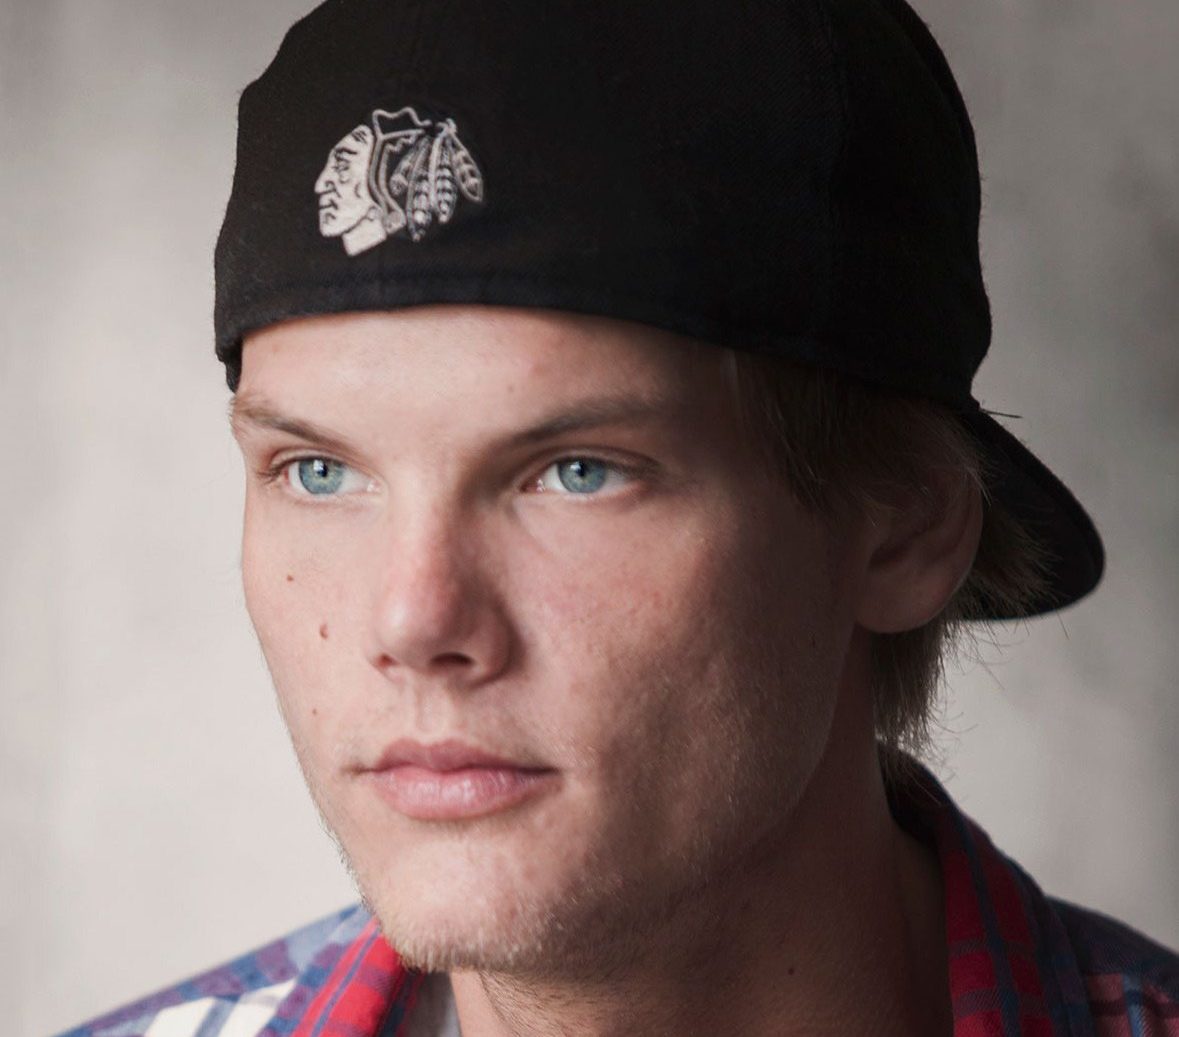 REMEMBERING AVICII WITH THESE TEN EPIC SONGS